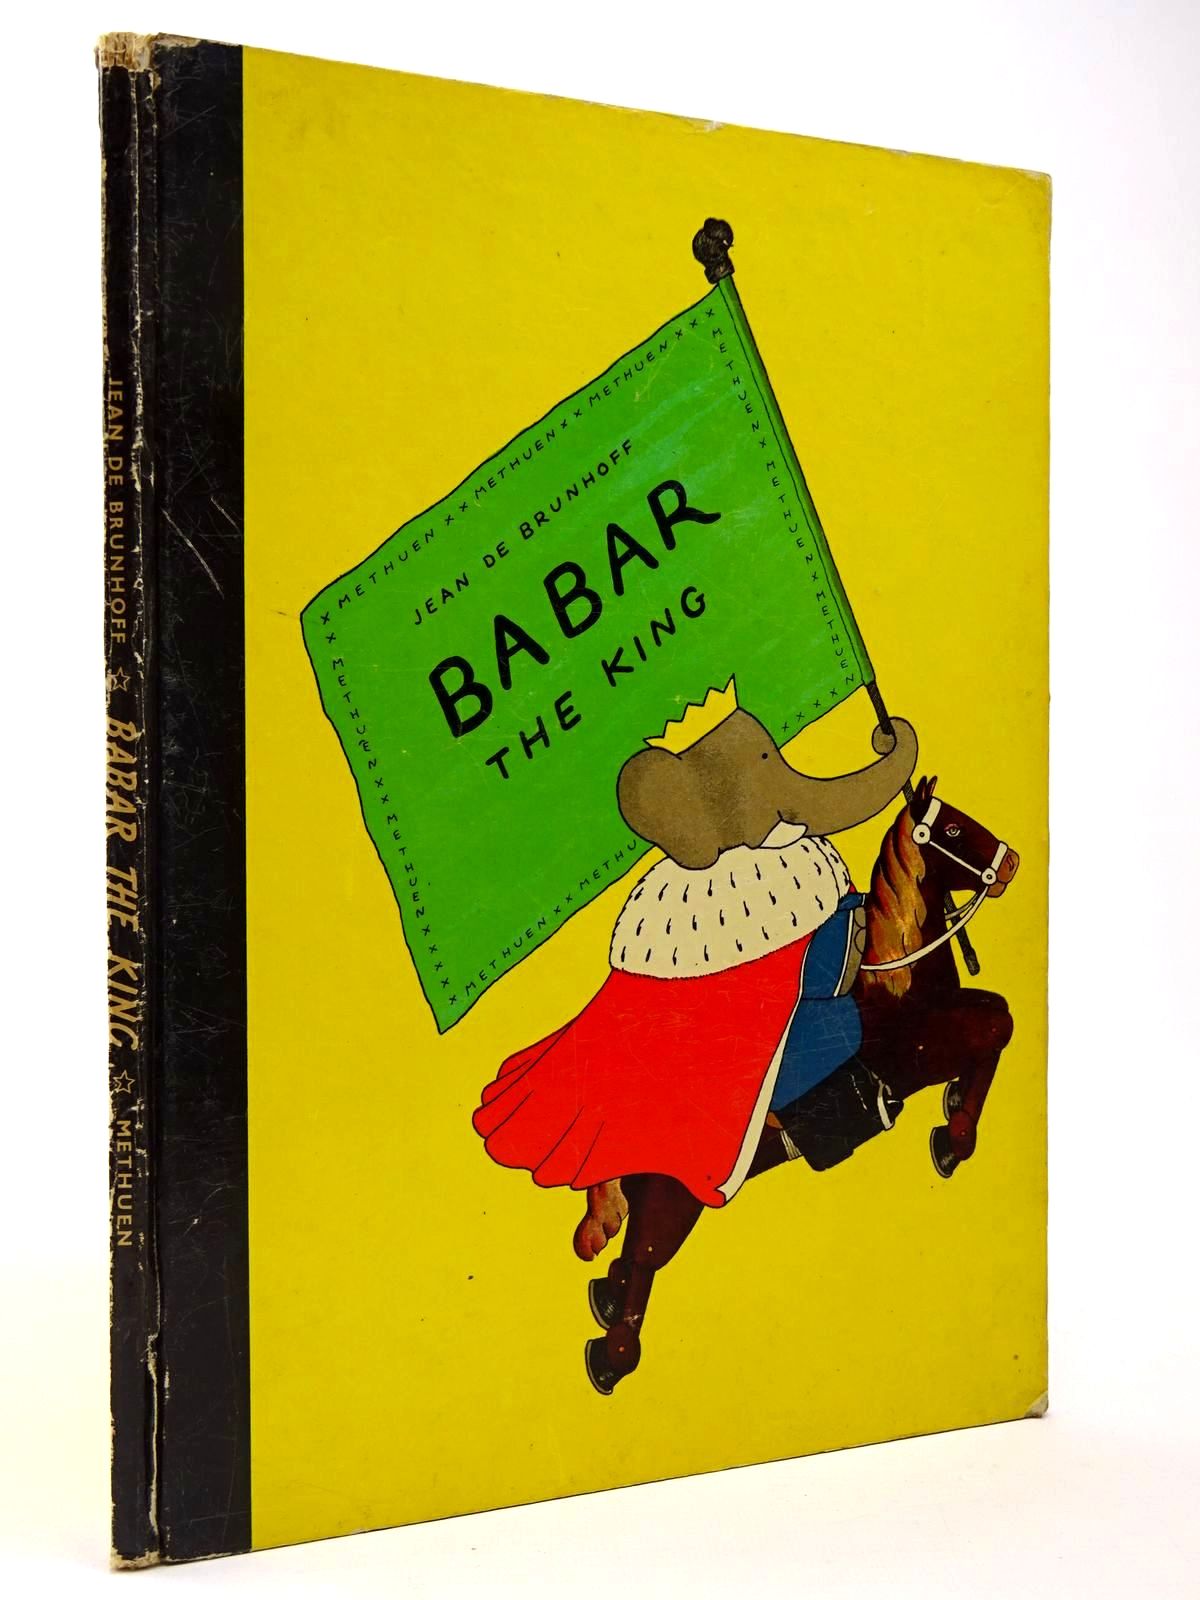 Photo of BABAR THE KING written by De Brunhoff, Jean published by Methuen &amp; Co. Ltd. (STOCK CODE: 2129829)  for sale by Stella & Rose's Books